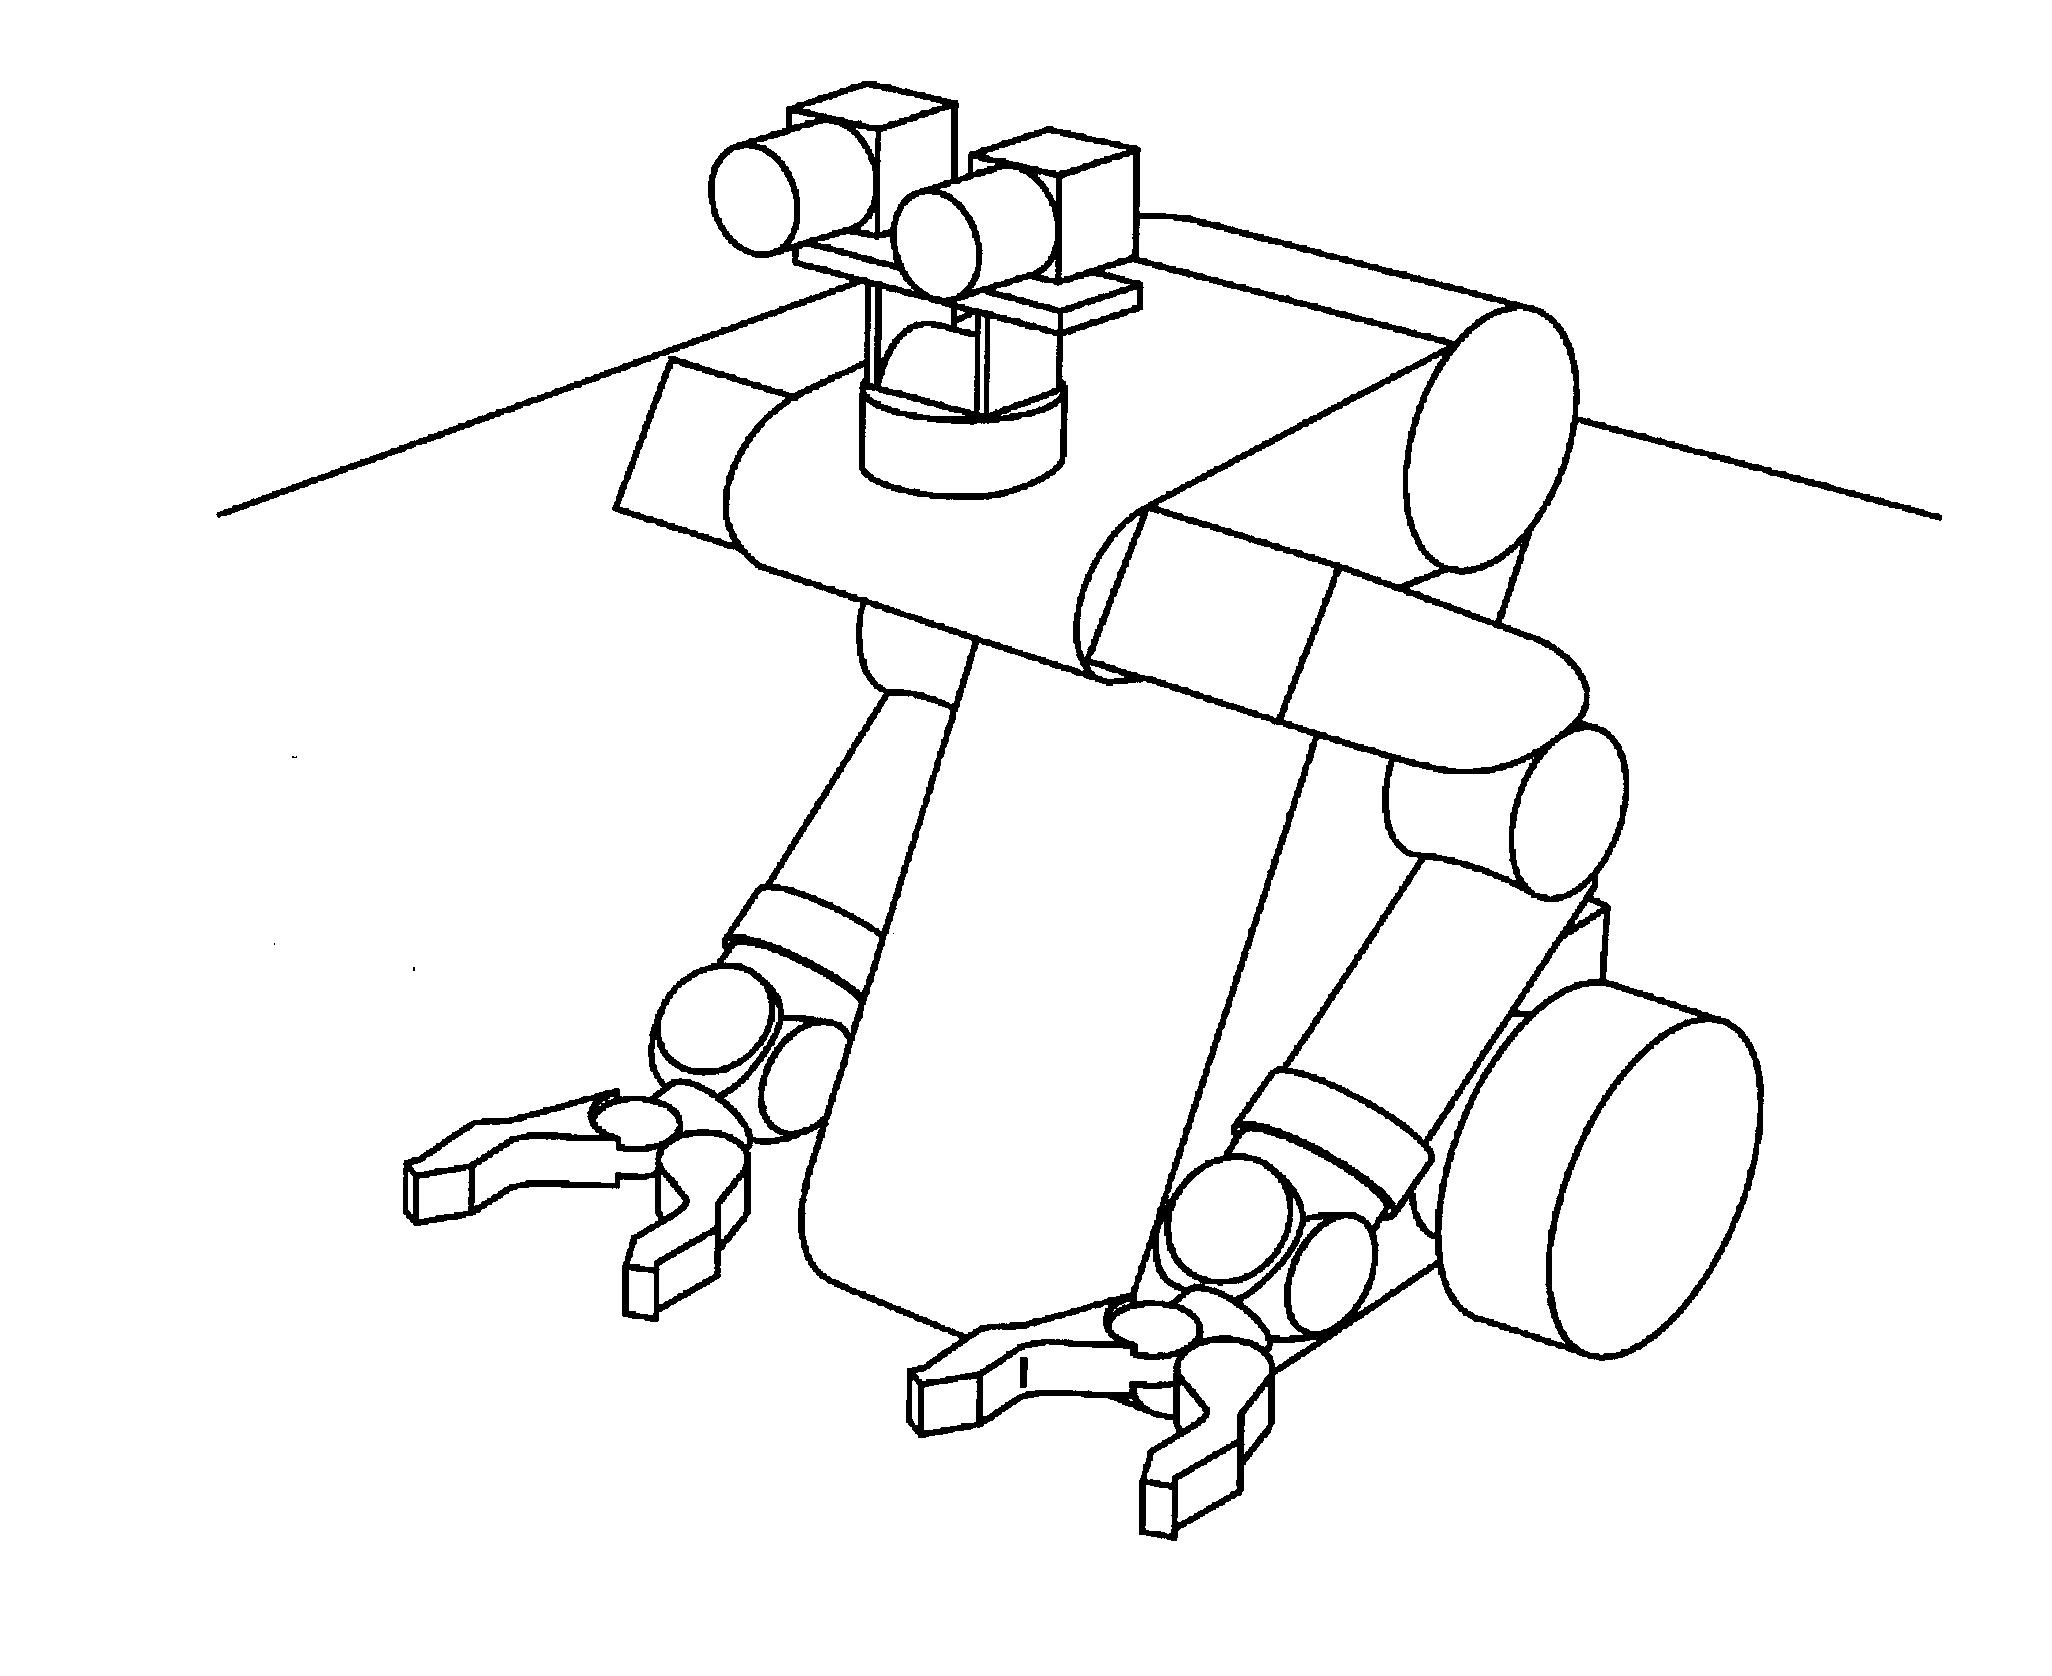 Robot apparatus and method of controlling the same, and computer program